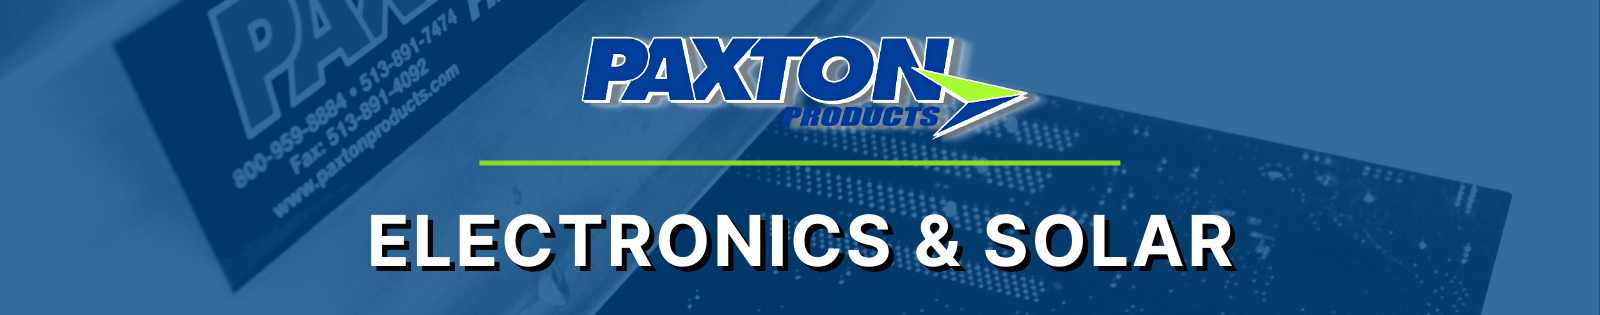 Paxton Products - Electronics & Solar 